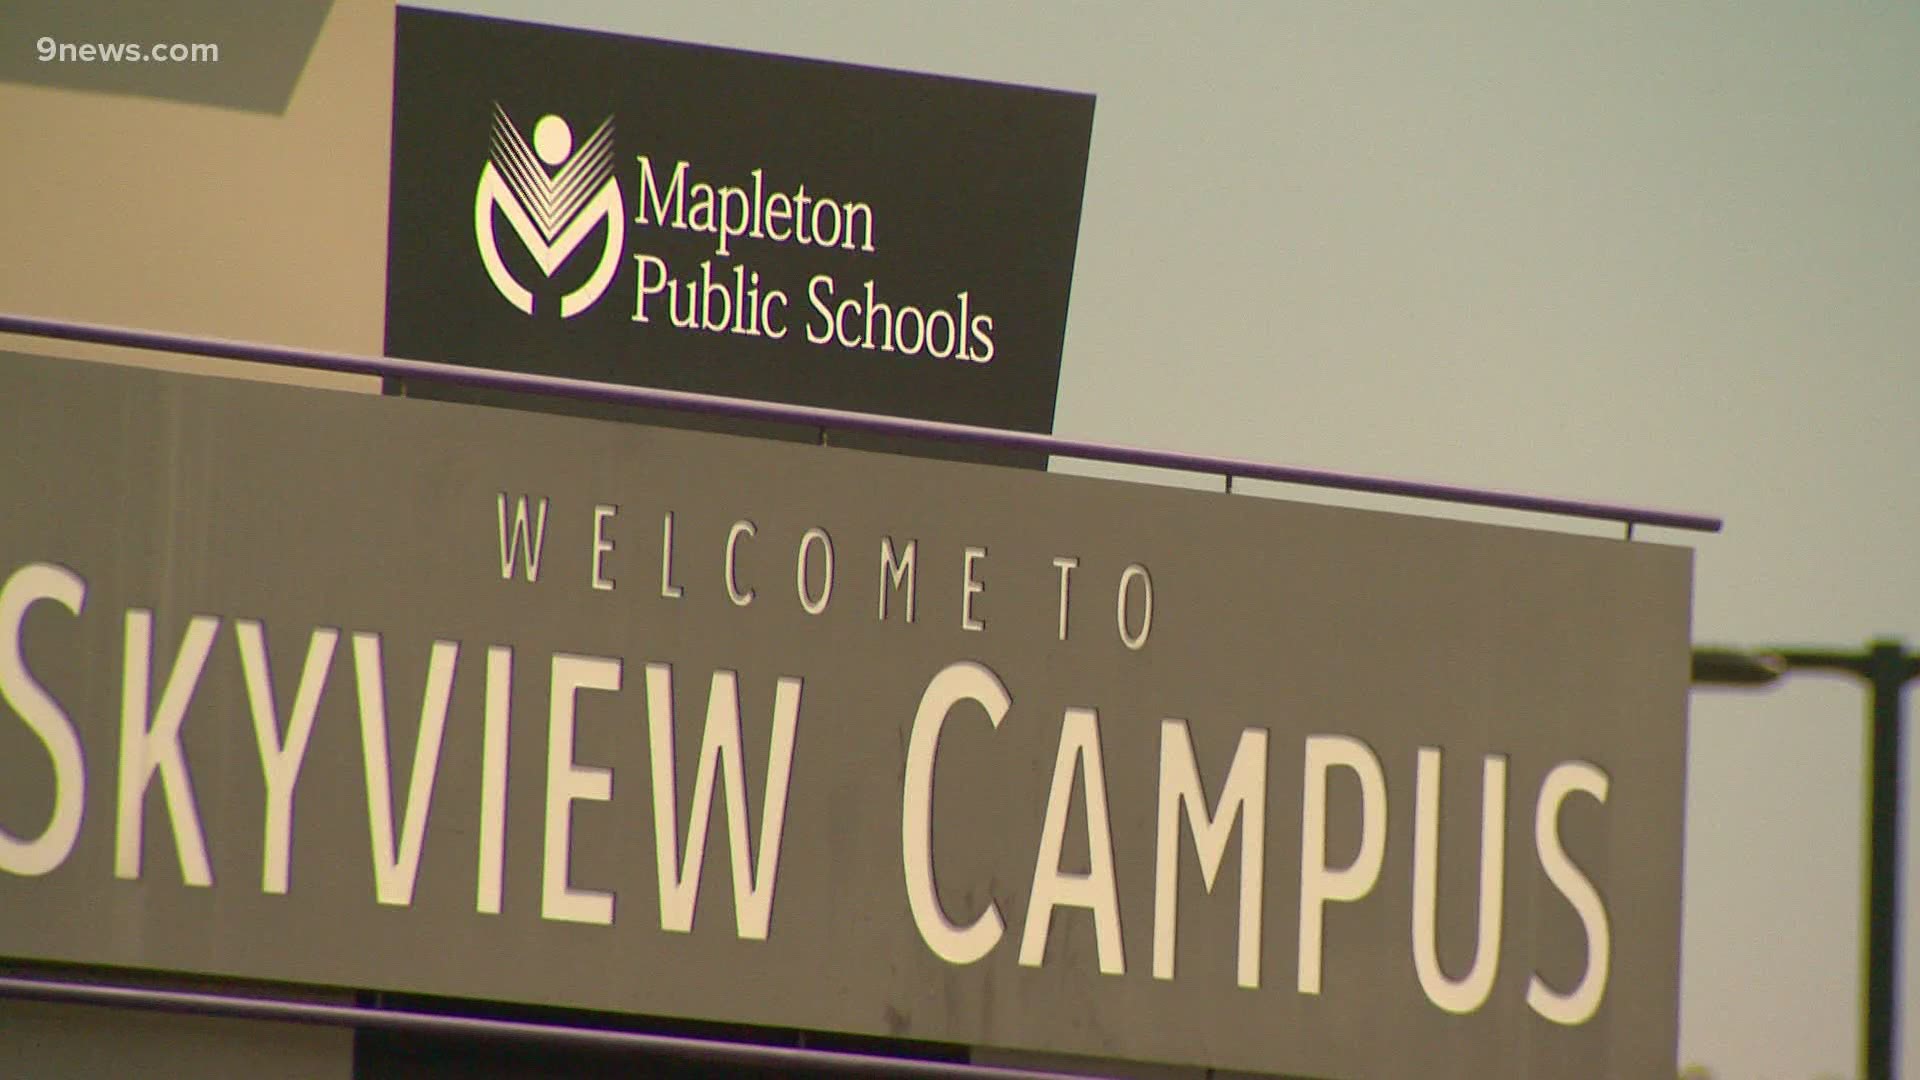 One teacher did not have symptoms but was tested ahead of the school year, according to a district spokesperson.